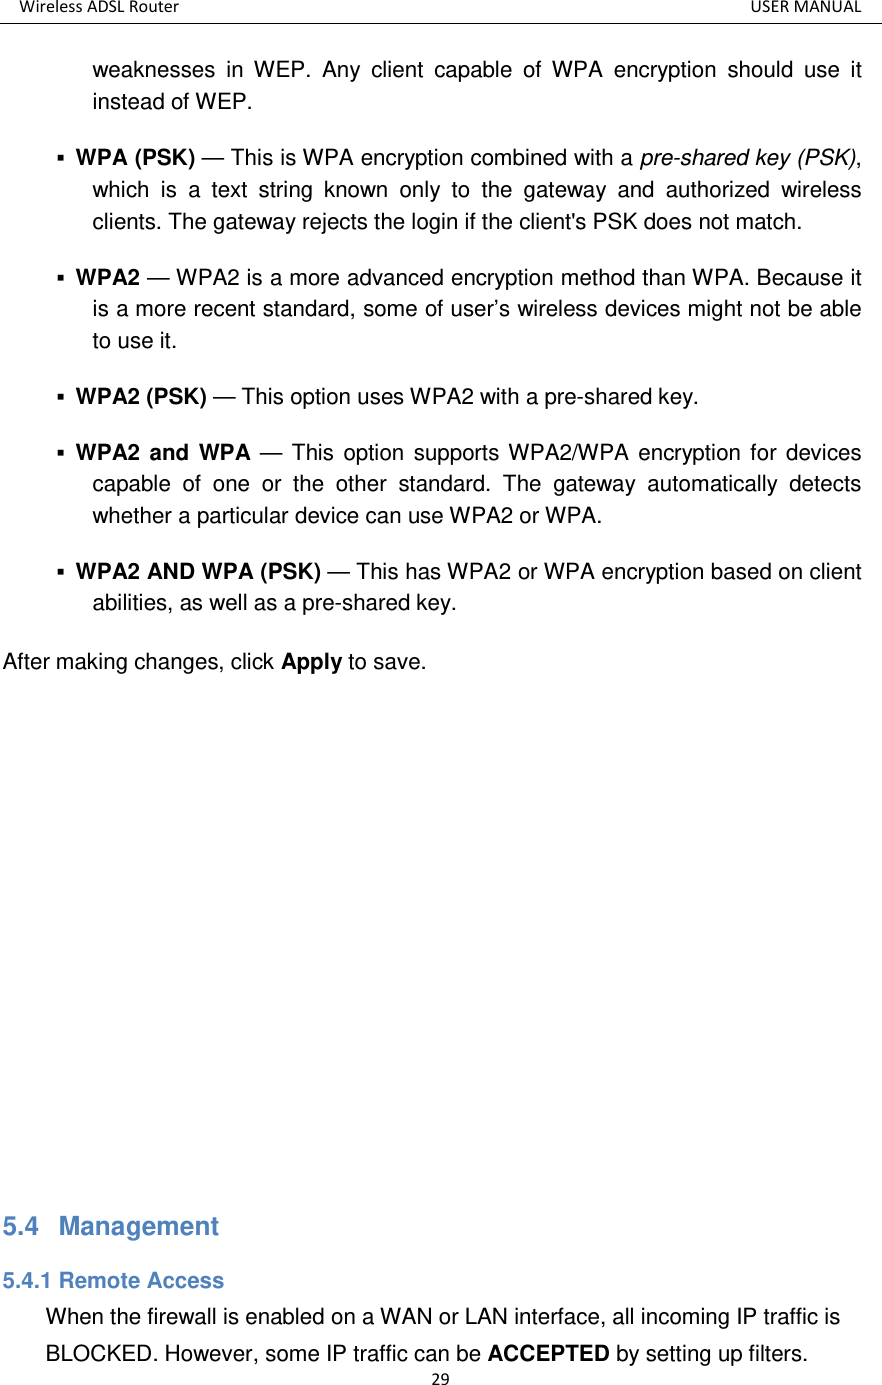 Wireless ADSL Router          USER MANUAL 29 weaknesses  in  WEP.  Any  client  capable  of  WPA  encryption  should  use  it instead of WEP.    WPA (PSK) — This is WPA encryption combined with a pre-shared key (PSK), which  is  a  text  string  known  only  to  the  gateway  and  authorized  wireless clients. The gateway rejects the login if the client&apos;s PSK does not match.    WPA2 — WPA2 is a more advanced encryption method than WPA. Because it is a more recent standard, some of user’s wireless devices might not be able to use it.    WPA2 (PSK) — This option uses WPA2 with a pre-shared key.    WPA2 and WPA — This option supports WPA2/WPA encryption for  devices capable  of  one  or  the  other  standard.  The  gateway  automatically  detects whether a particular device can use WPA2 or WPA.    WPA2 AND WPA (PSK) — This has WPA2 or WPA encryption based on client abilities, as well as a pre-shared key.   After making changes, click Apply to save.          5.4   Management 5.4.1 Remote Access When the firewall is enabled on a WAN or LAN interface, all incoming IP traffic is BLOCKED. However, some IP traffic can be ACCEPTED by setting up filters. 